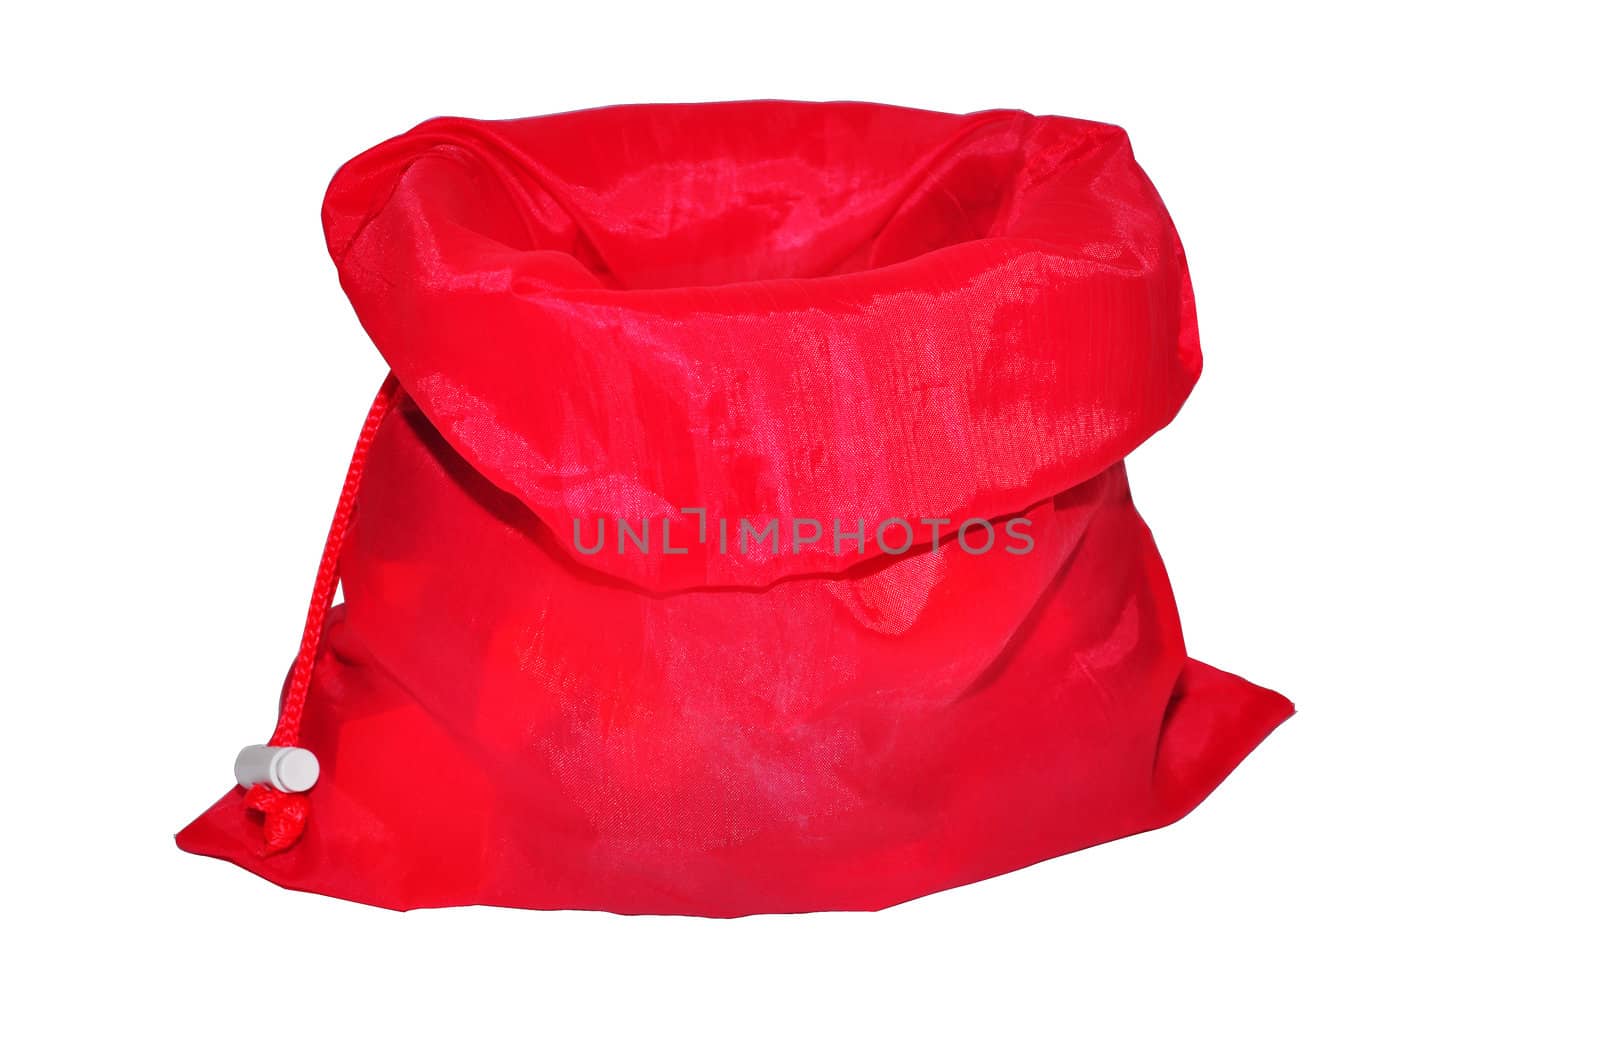 Red sack for gifts on a white background